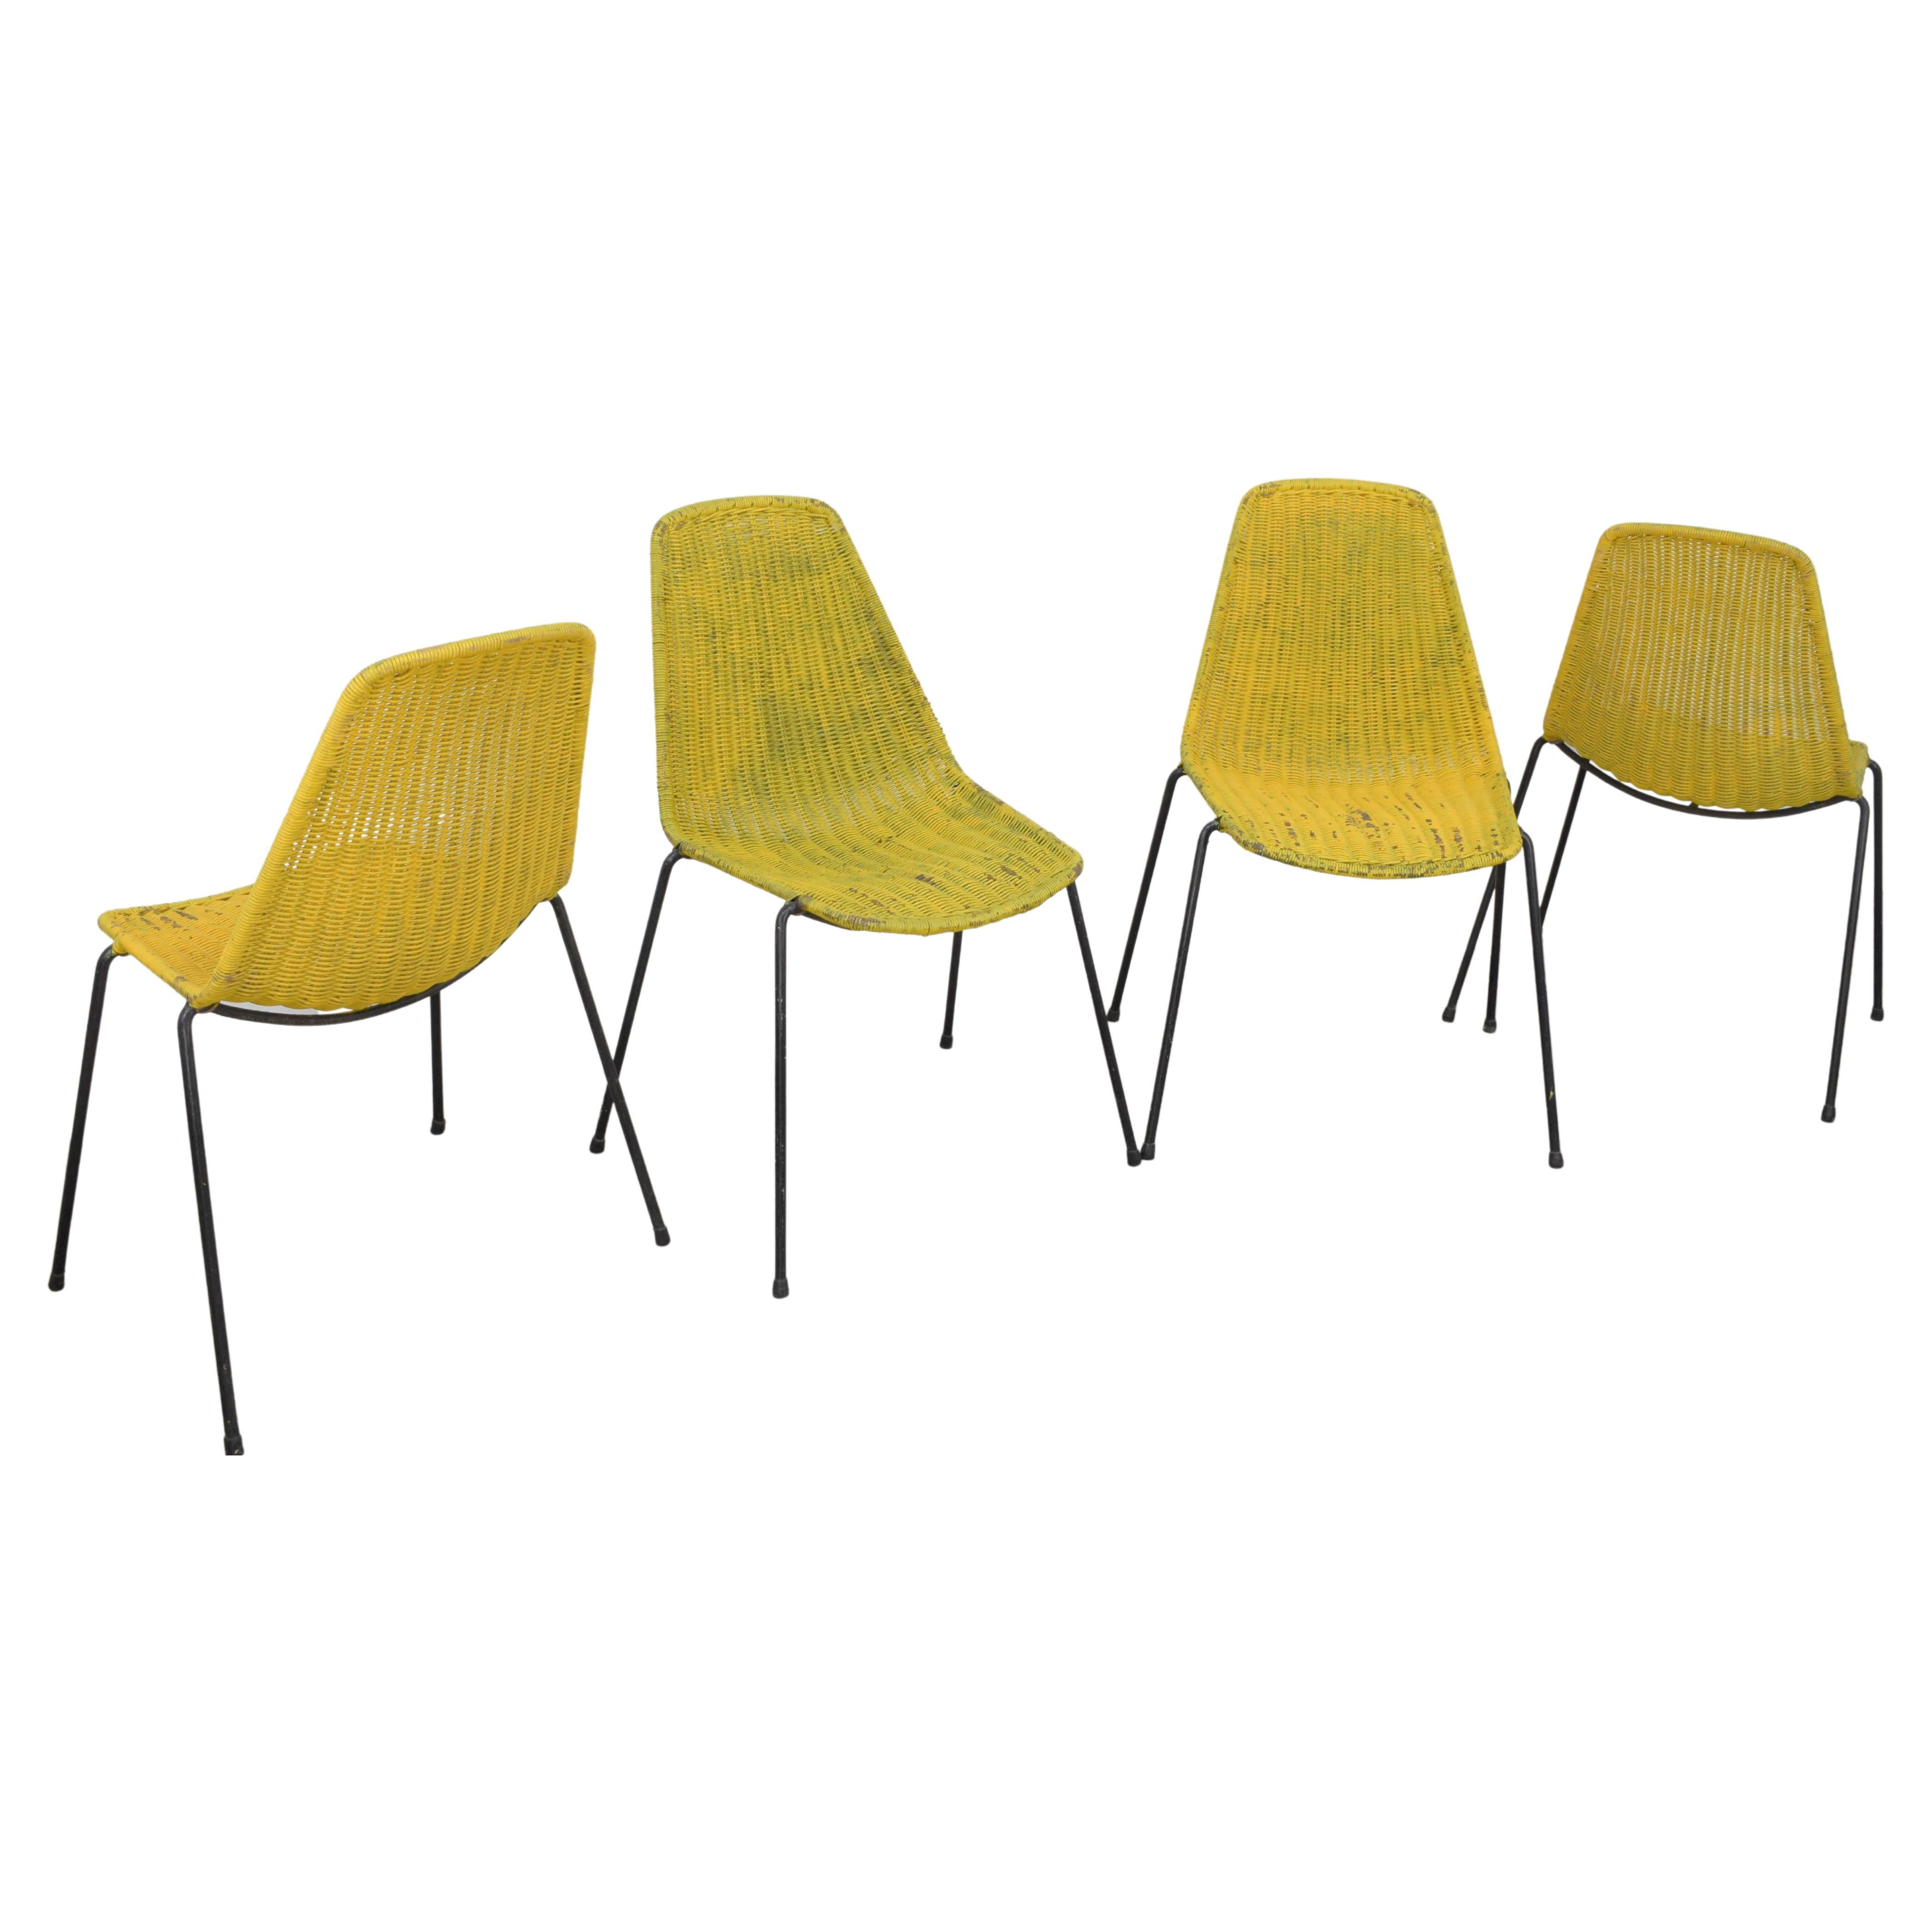 Gianfranco Legler, Set of Four Chairs, 1960s For Sale